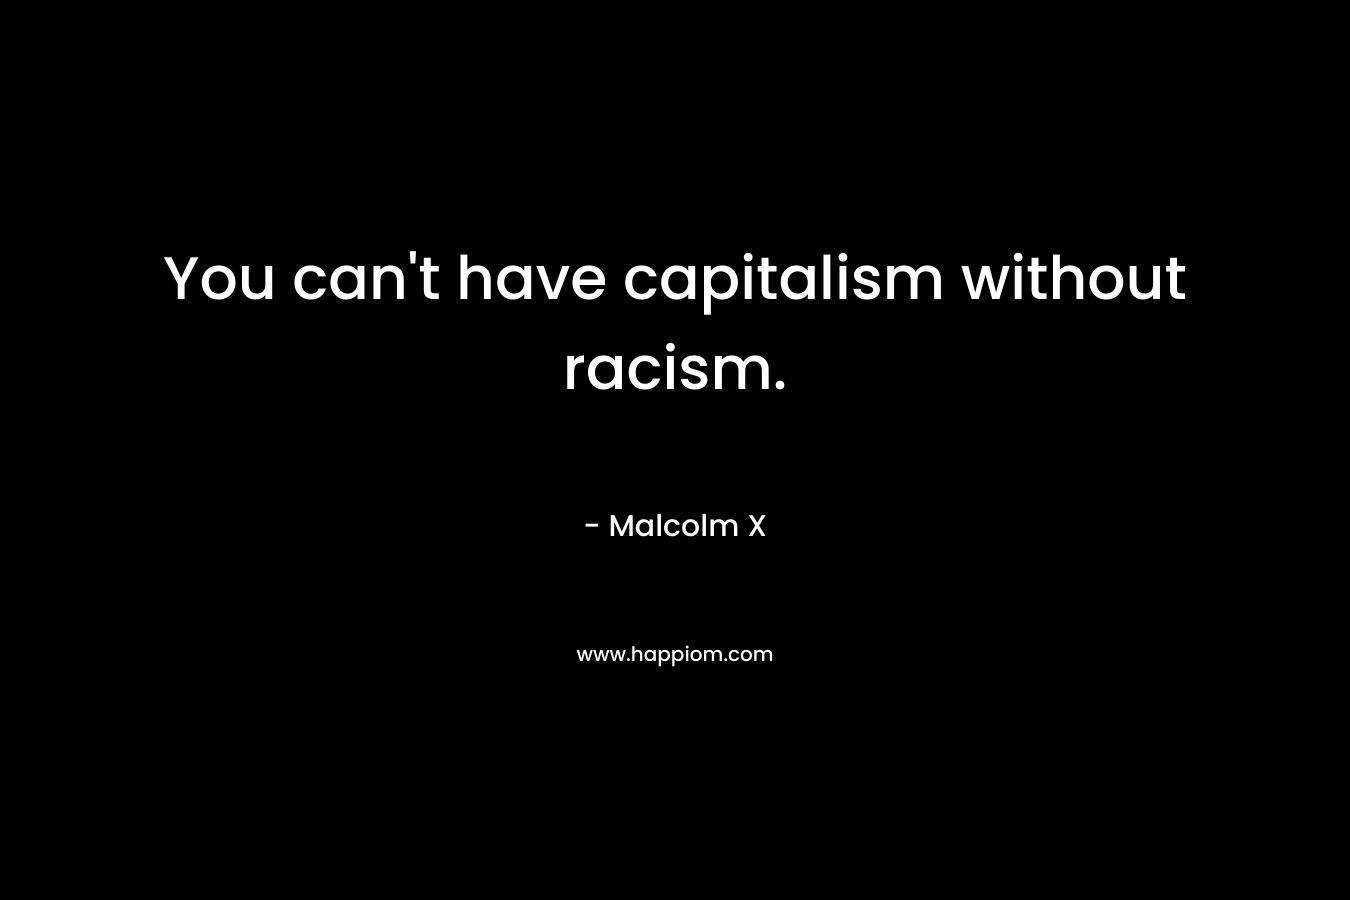 You can’t have capitalism without racism. – Malcolm X